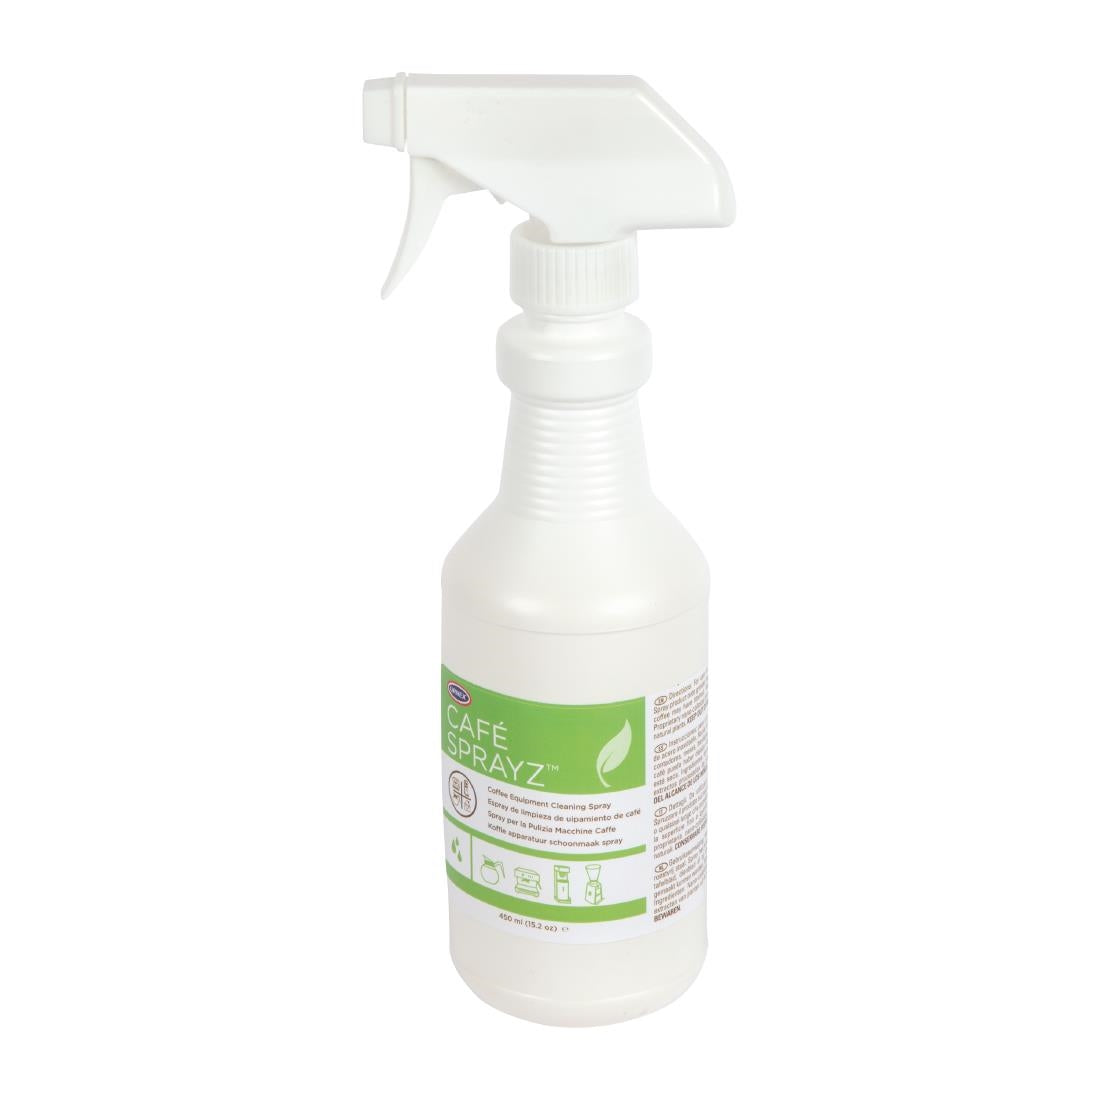 CX515 Urnex Café Coffee Equipment Cleaning Spray Ready To Use 450ml